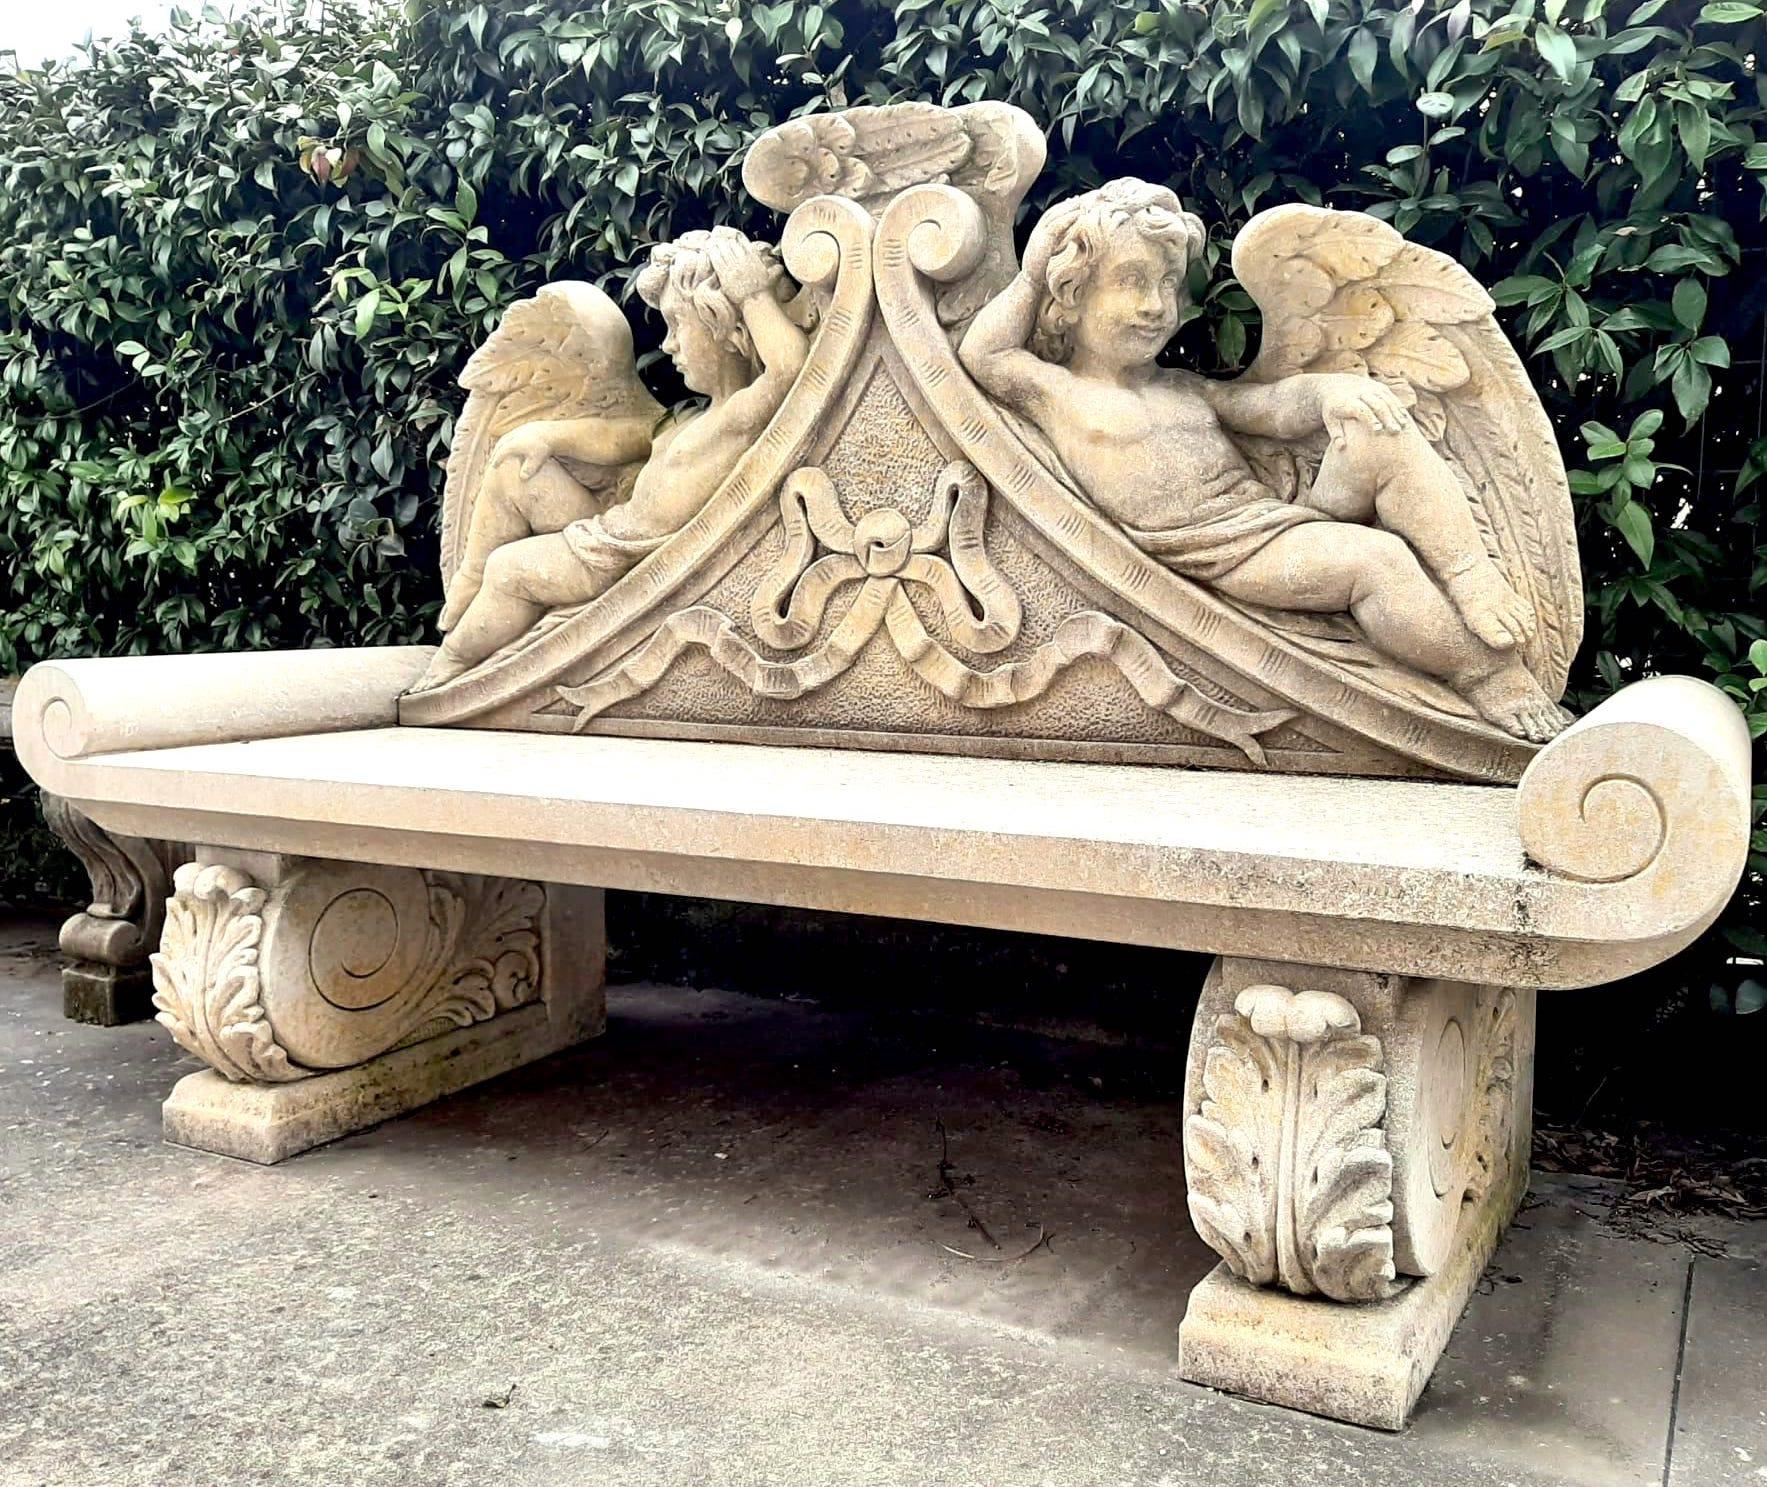 Outdoor Italian Finely Carved Large Lime Stone Bench Garden Furniture In Excellent Condition For Sale In Rome, IT